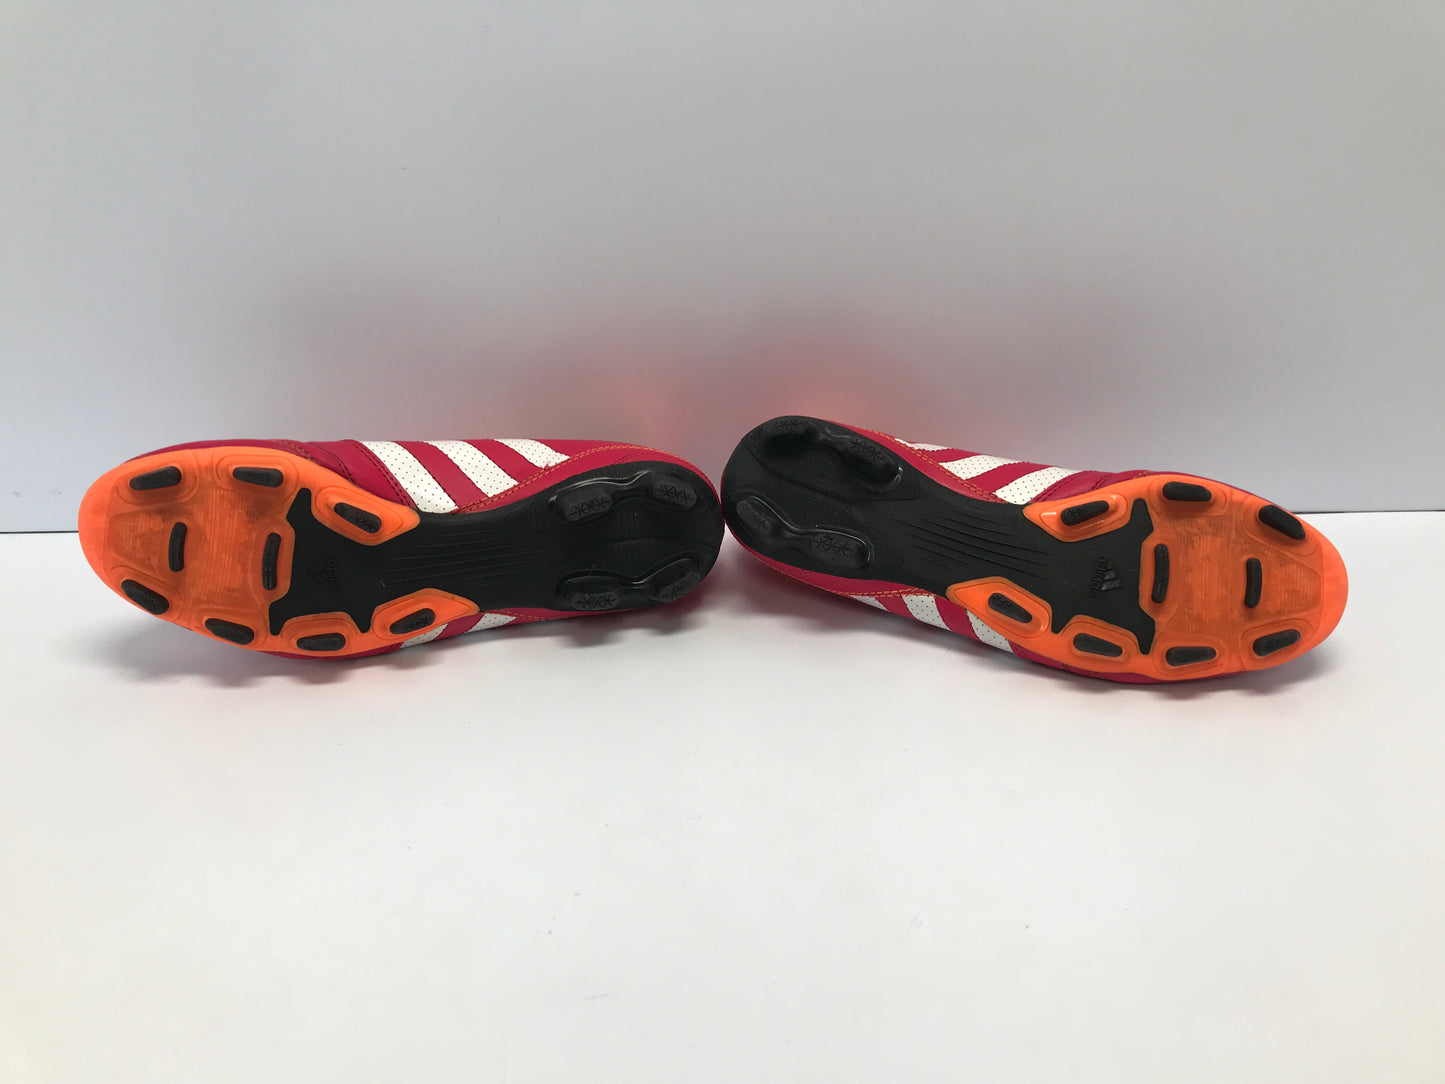 Soccer Shoes Cleats Men's Size 7.5 Adidas Pink Tangerine Excellent